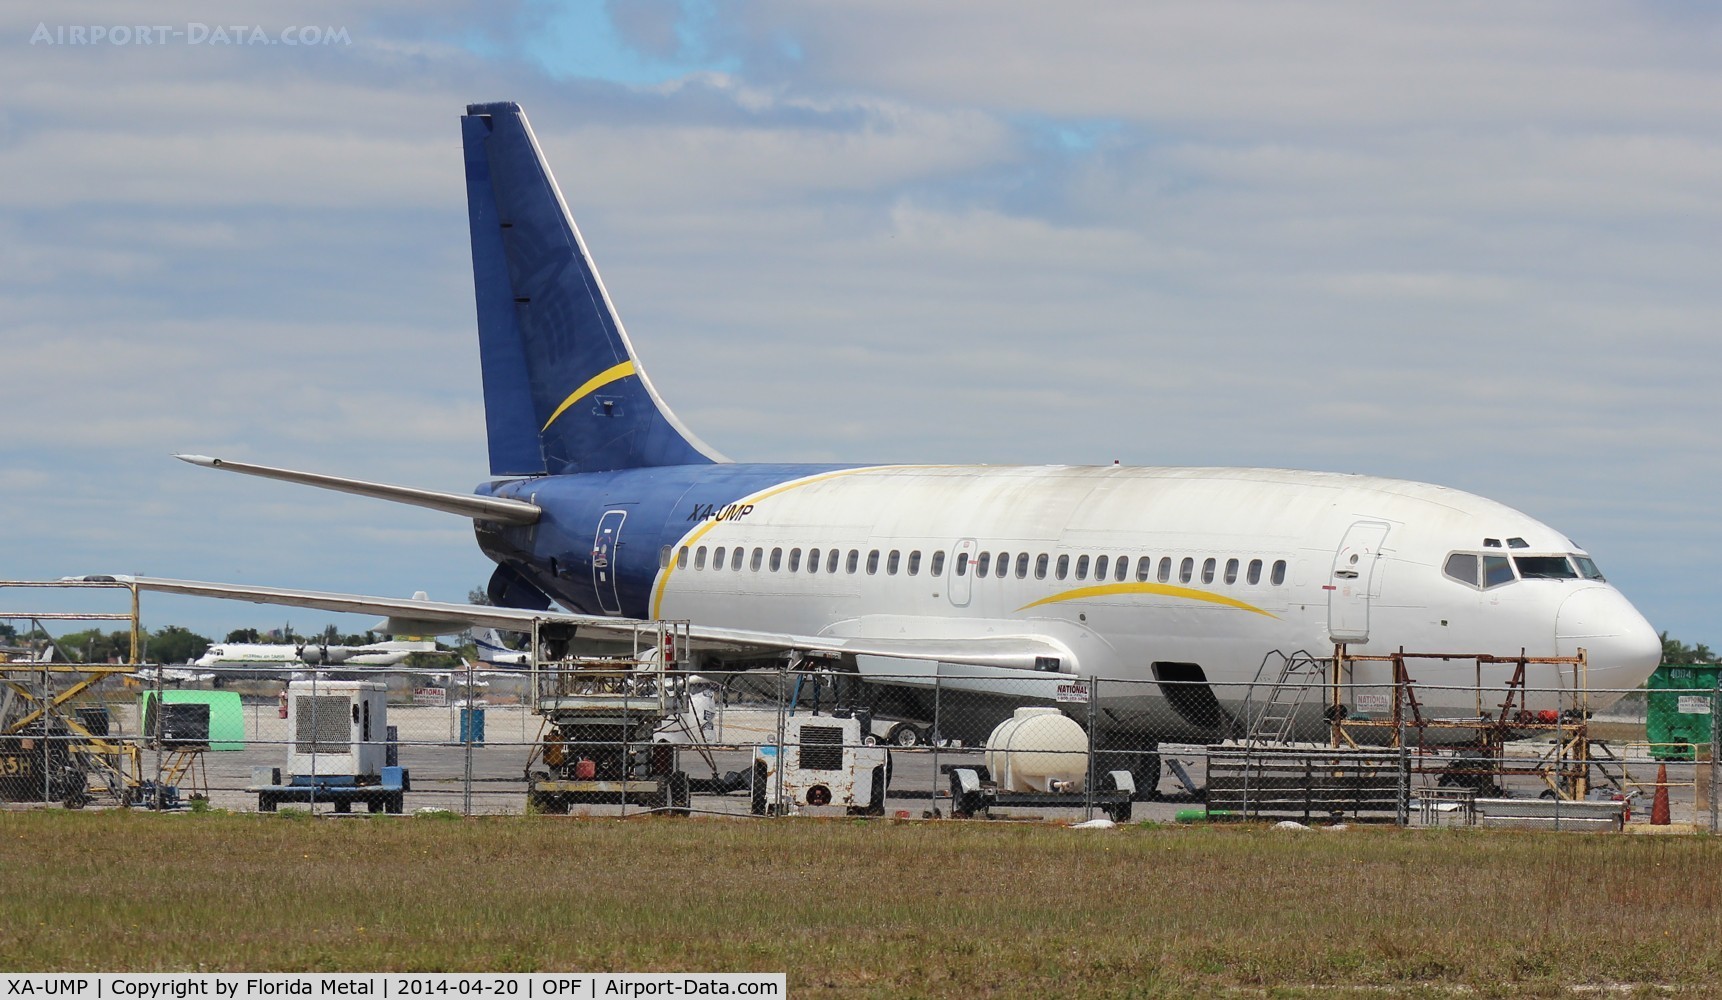 XA-UMP, 1982 Boeing 737-2A3 C/N 22738, Un Titled 737-200 about to get scrapped